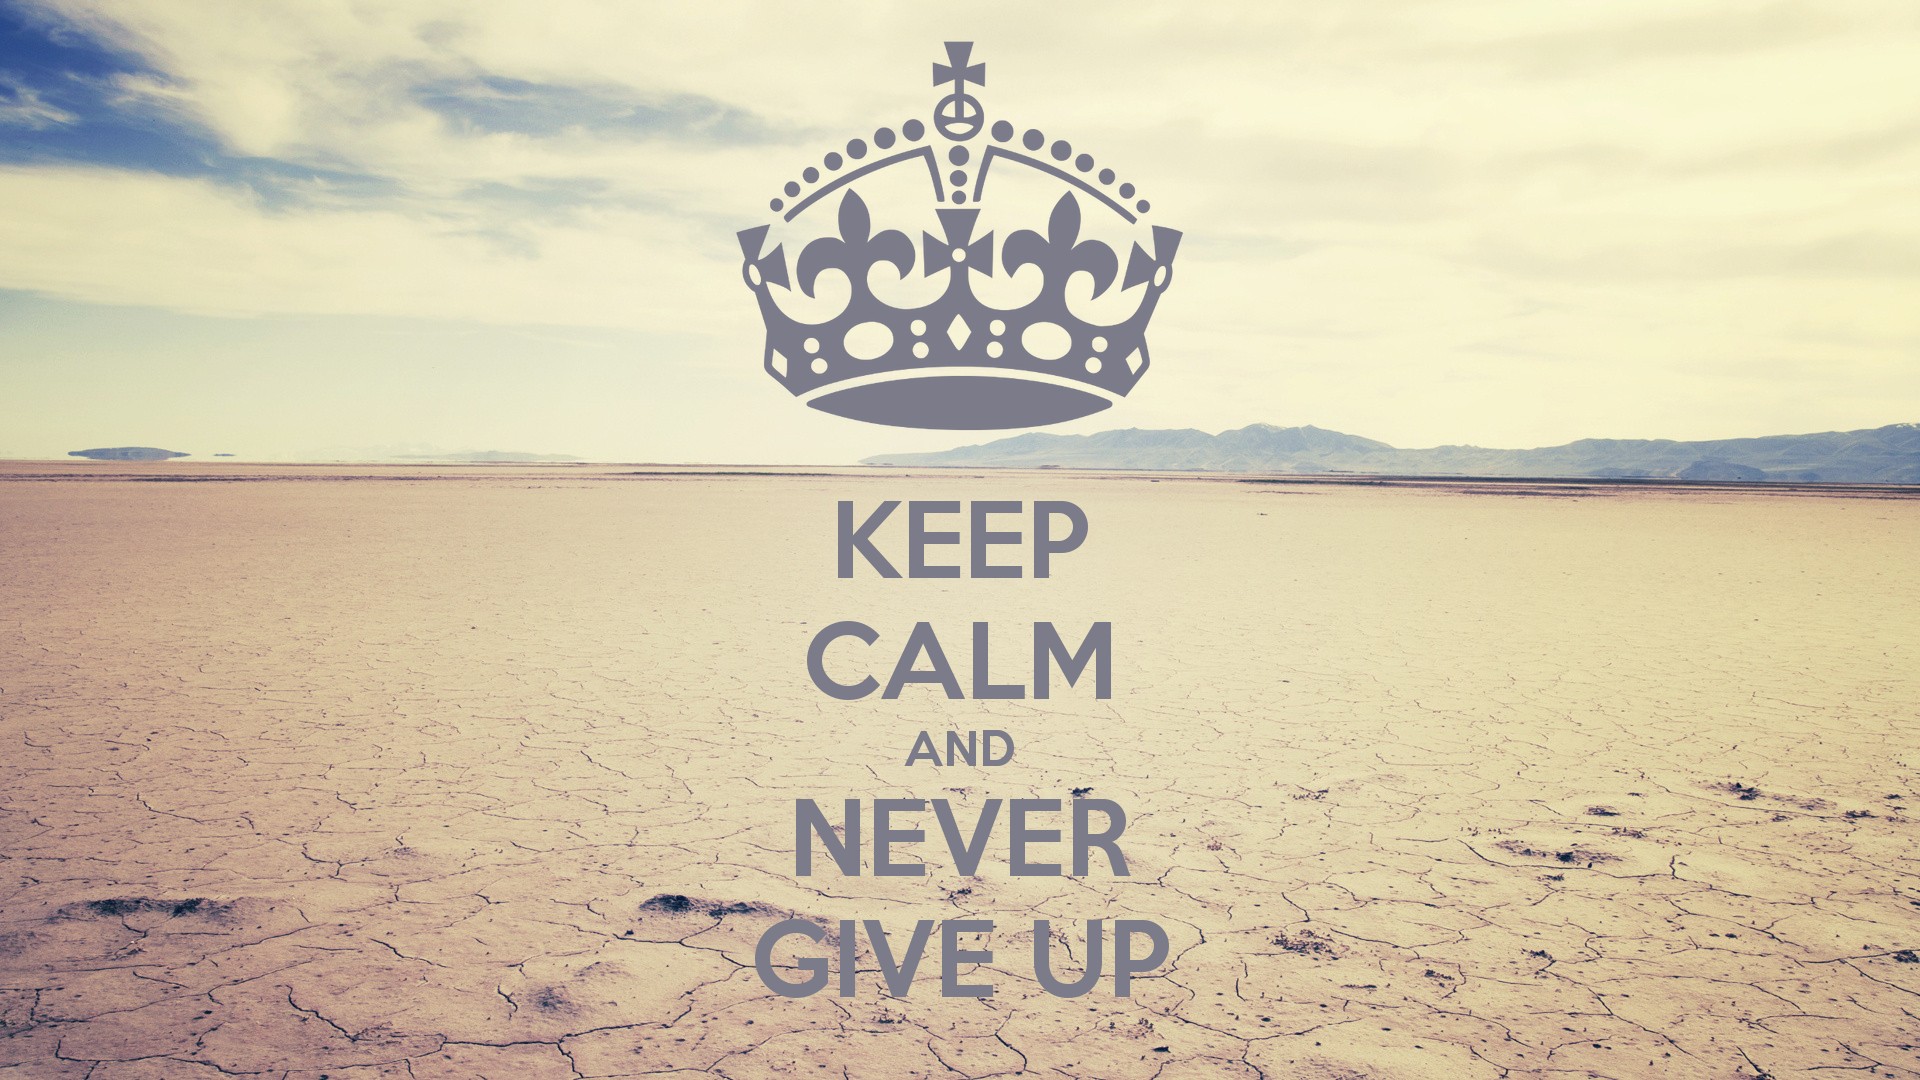 never give up wallpaper,font,text,sky,logo,water